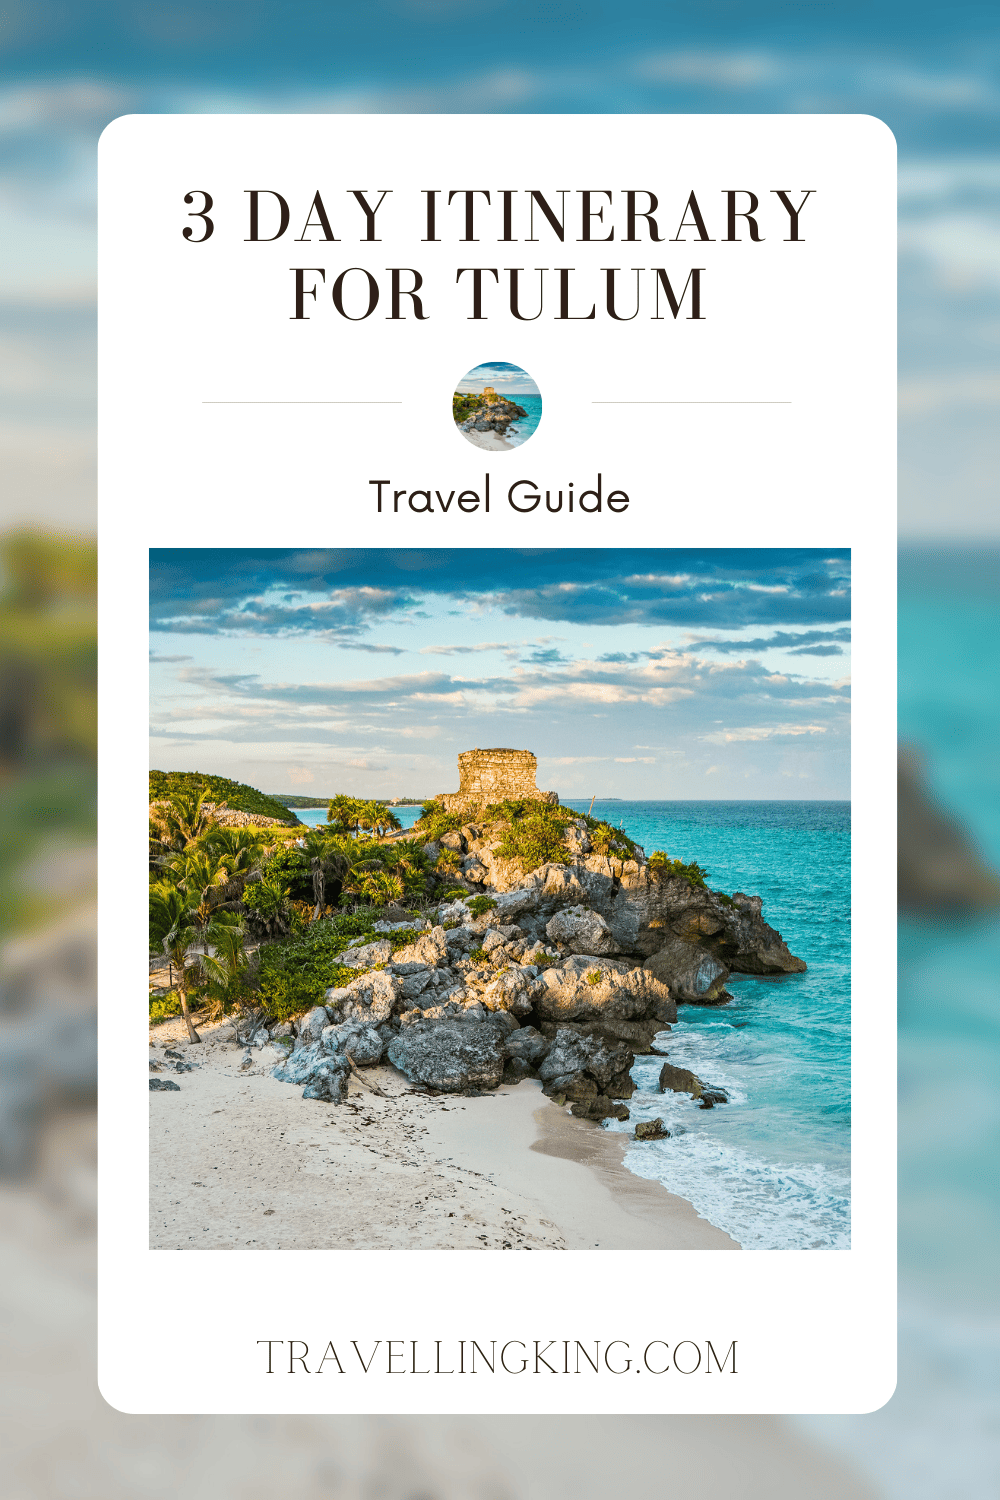 3 Day Itinerary For Tulum